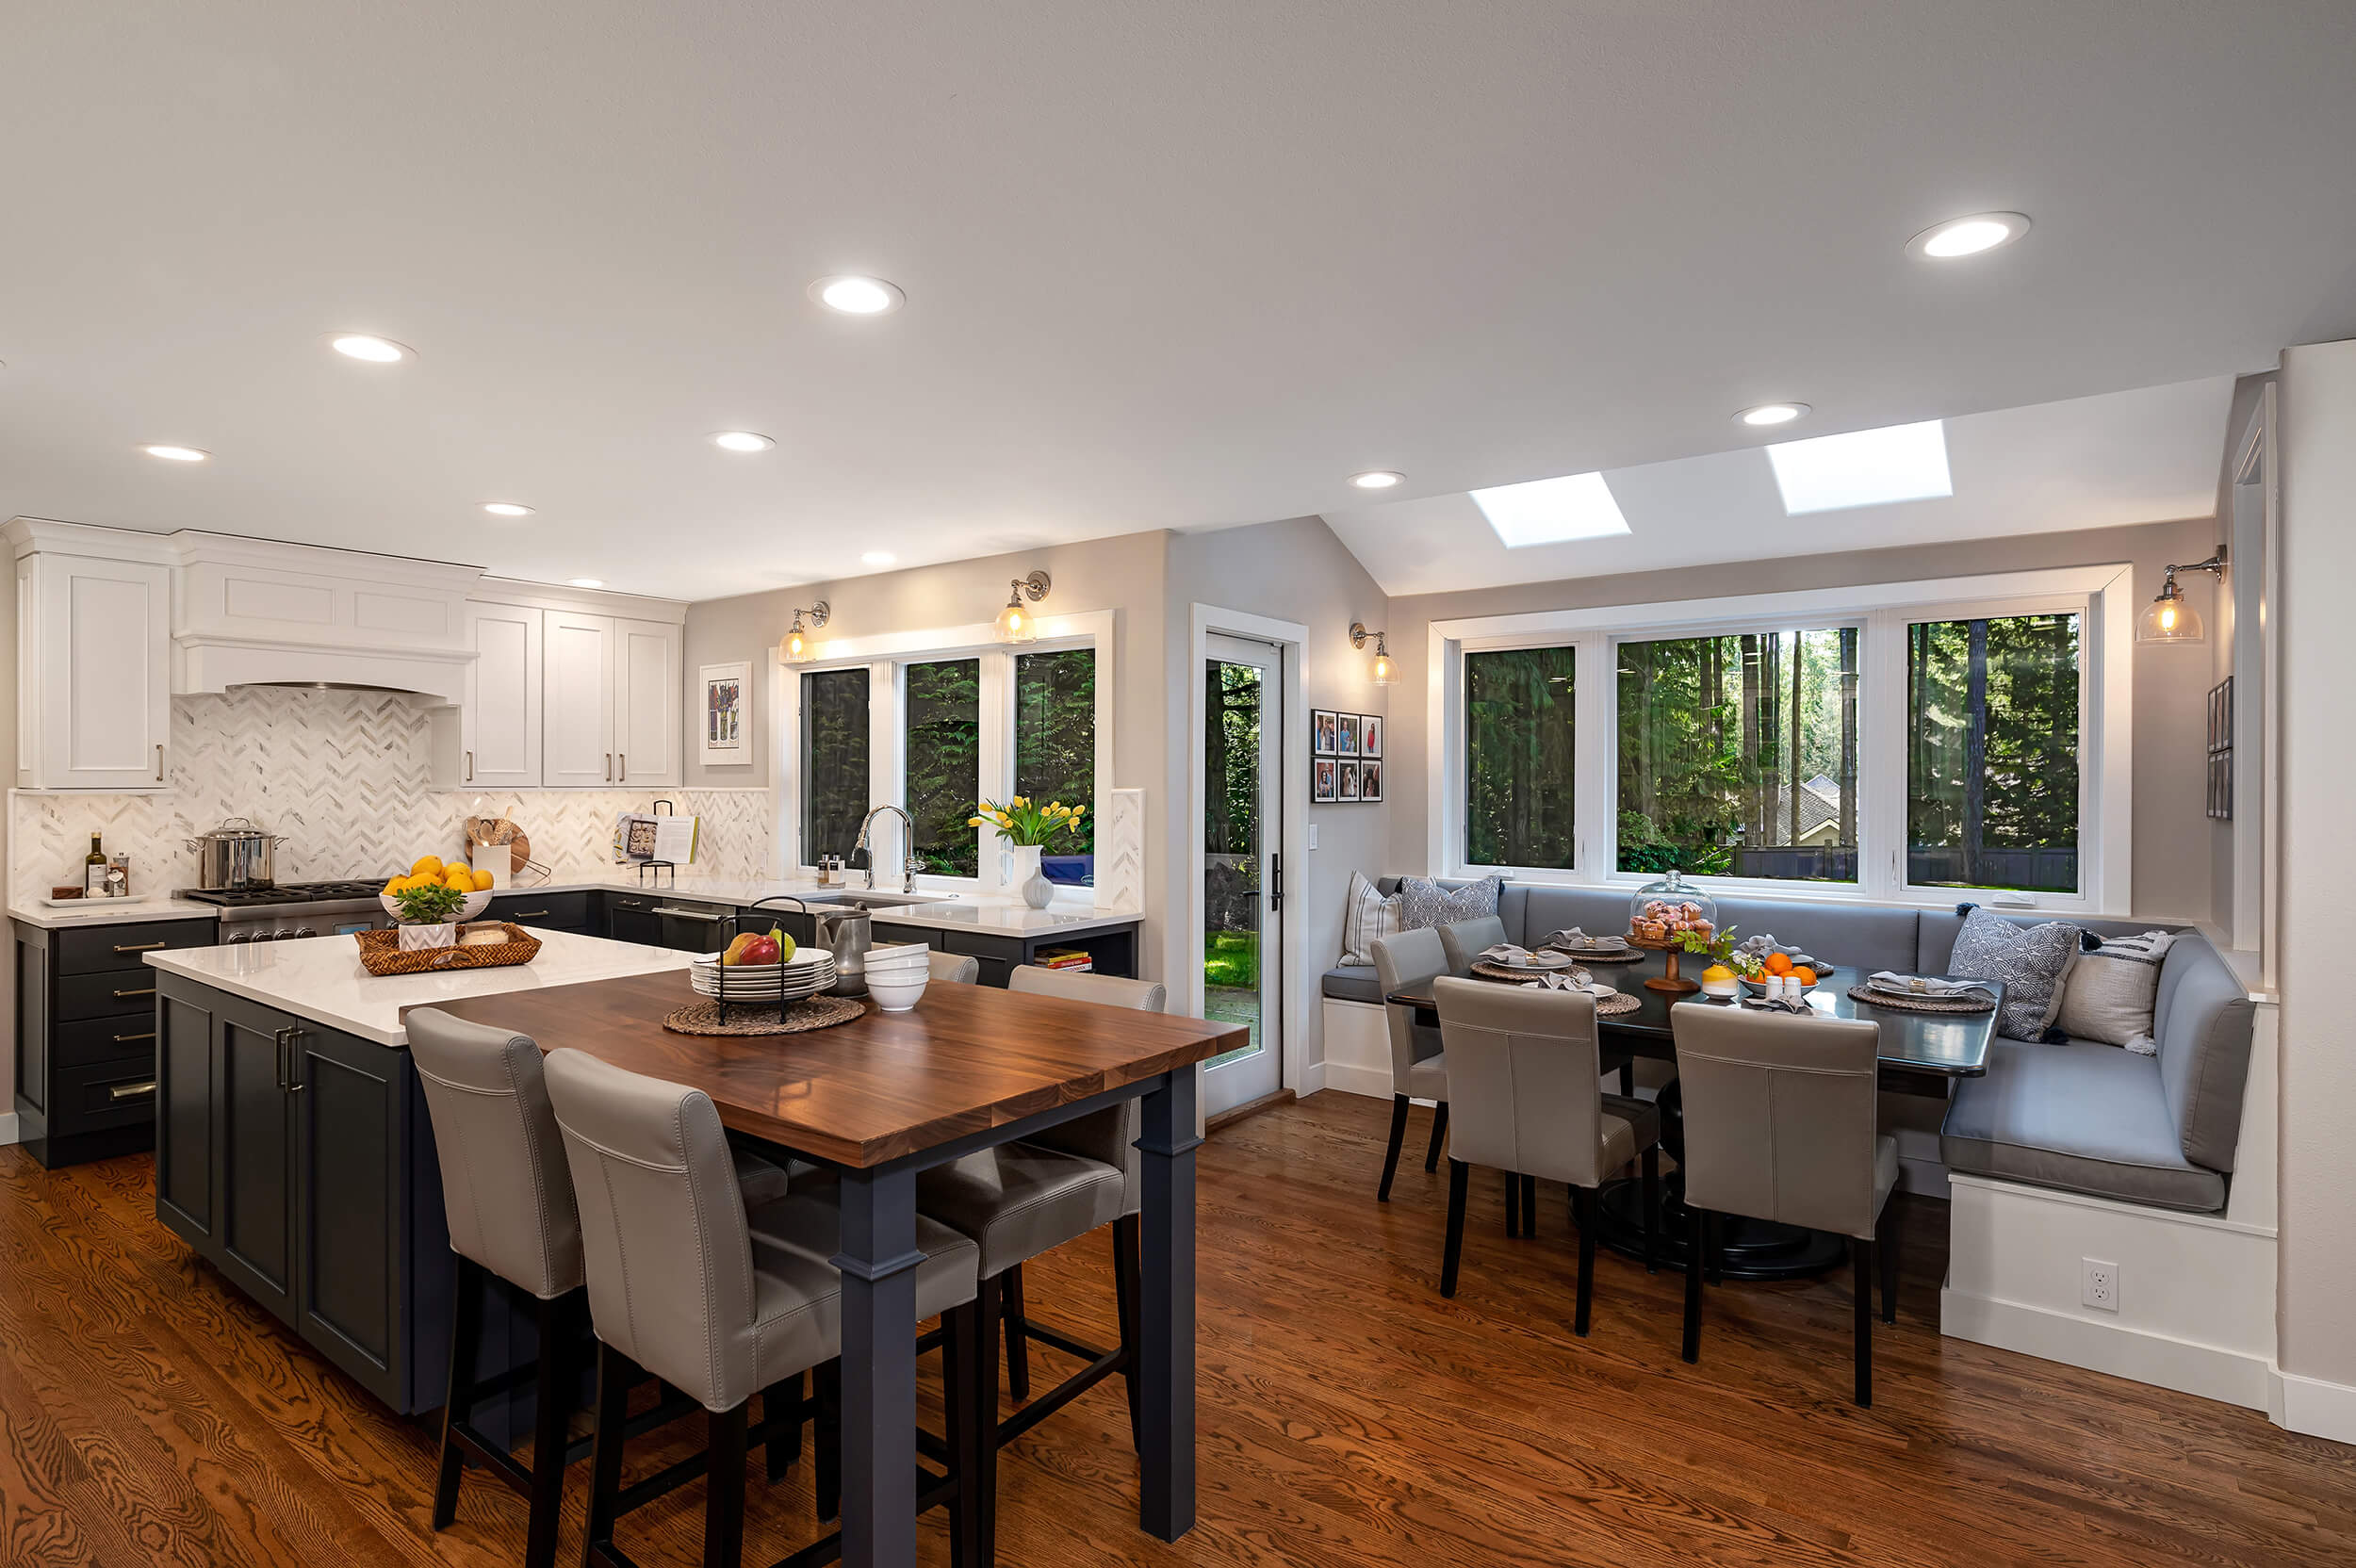 A kitchen and dining room design with a built-in breakfast nook.